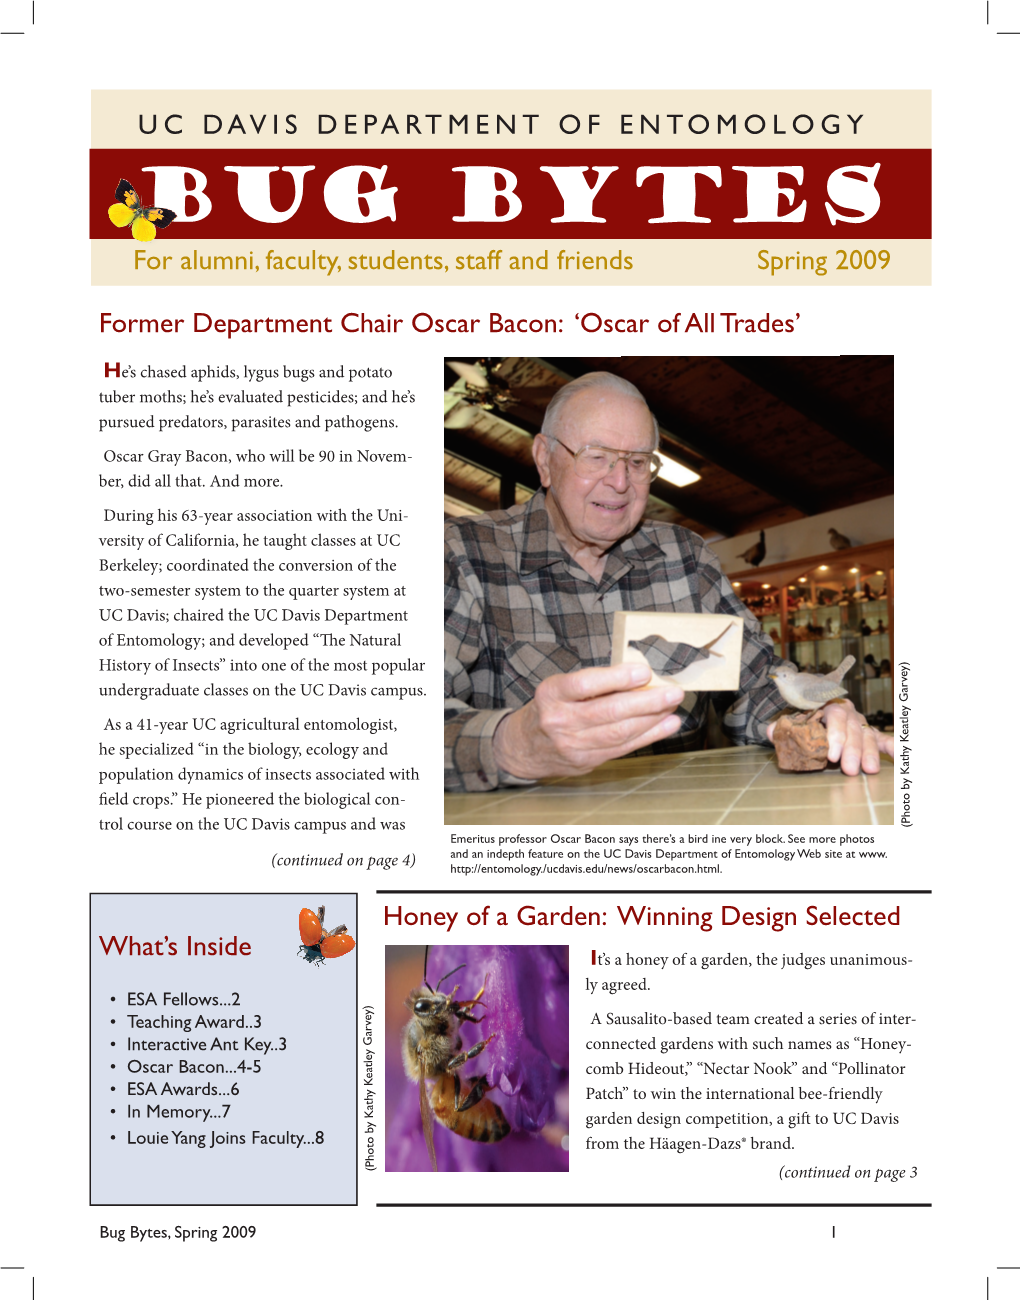 Bug Bytes for Alumni, Faculty, Students, Staff and Friends Spring 2009